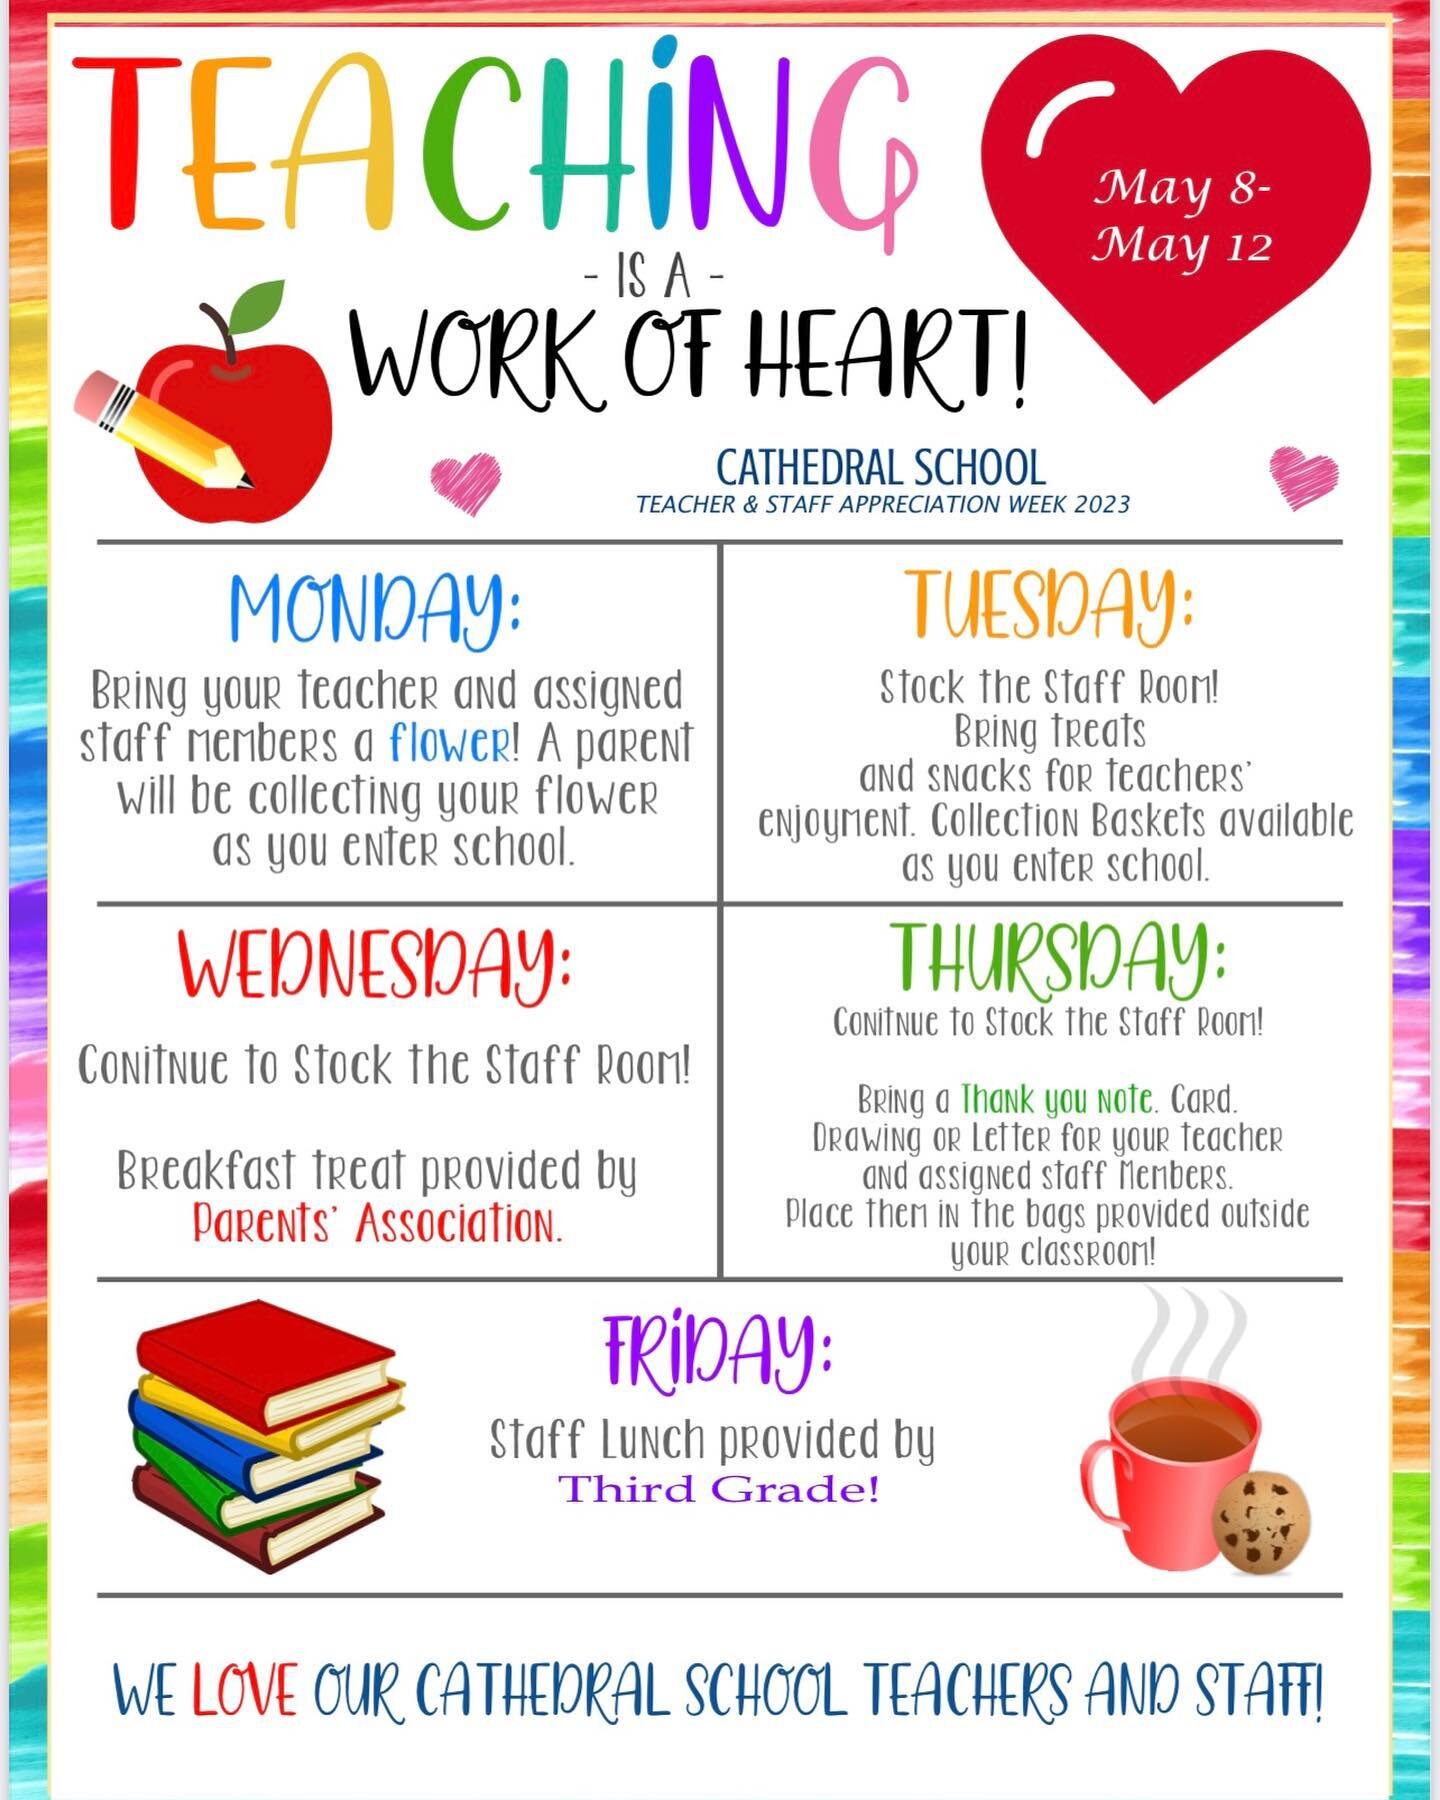 Teacher &amp; Staff Appreciation Week! ❤️🍎💐

Thank you for all you do to make Cathedral School such a special place. 

#cathedralschool #catholicschool #elementaryschool #middleschool #teacherappreciationweek